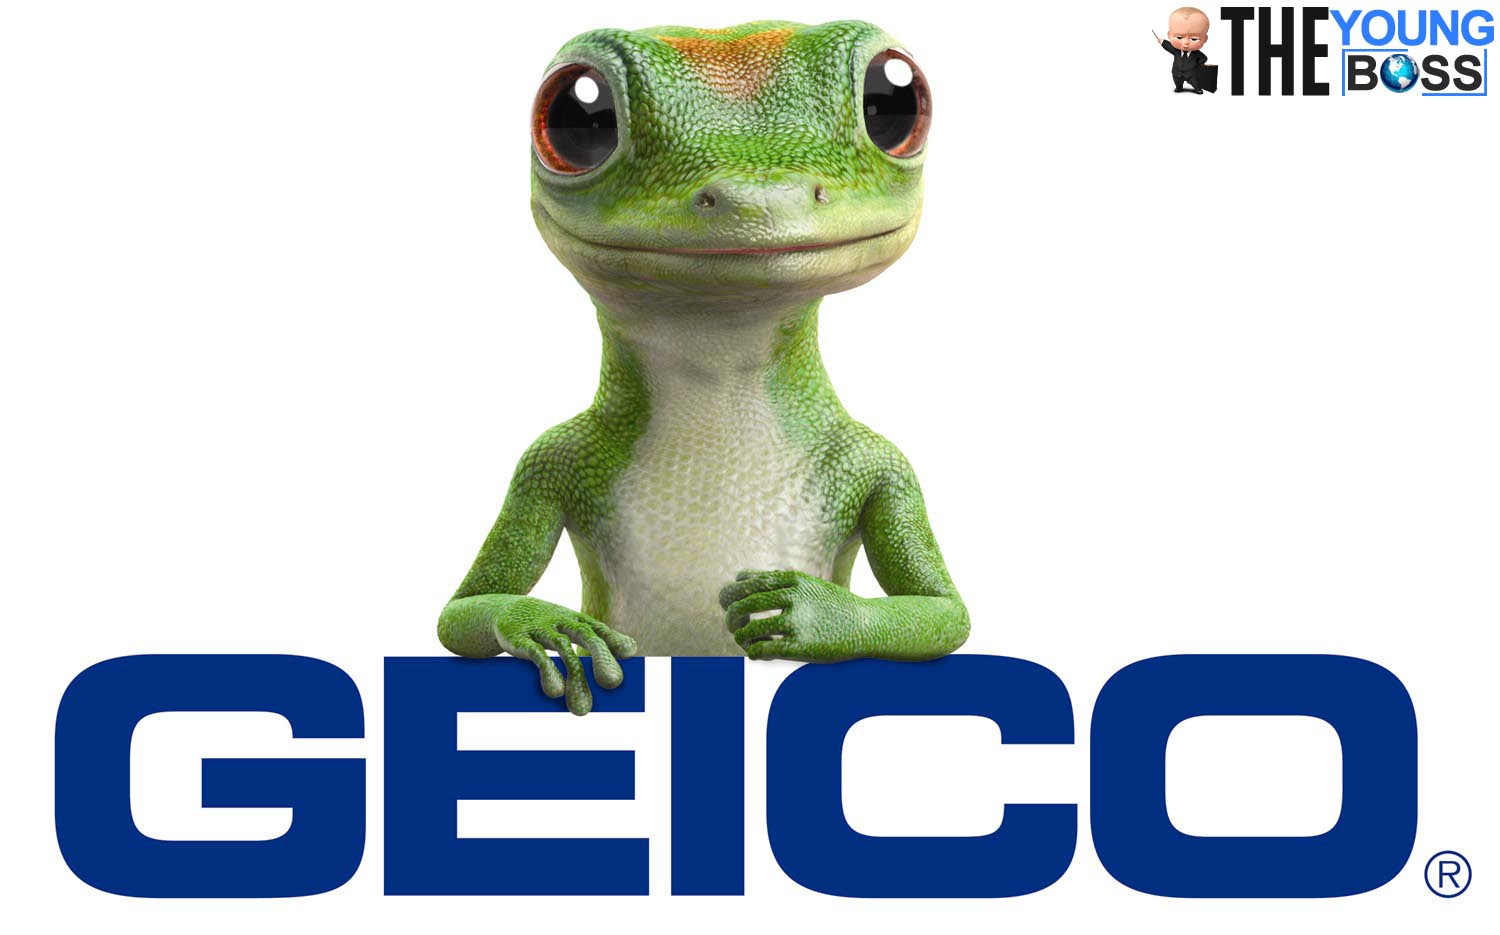 Geico Insurance Review: Read all you need to know15 min read